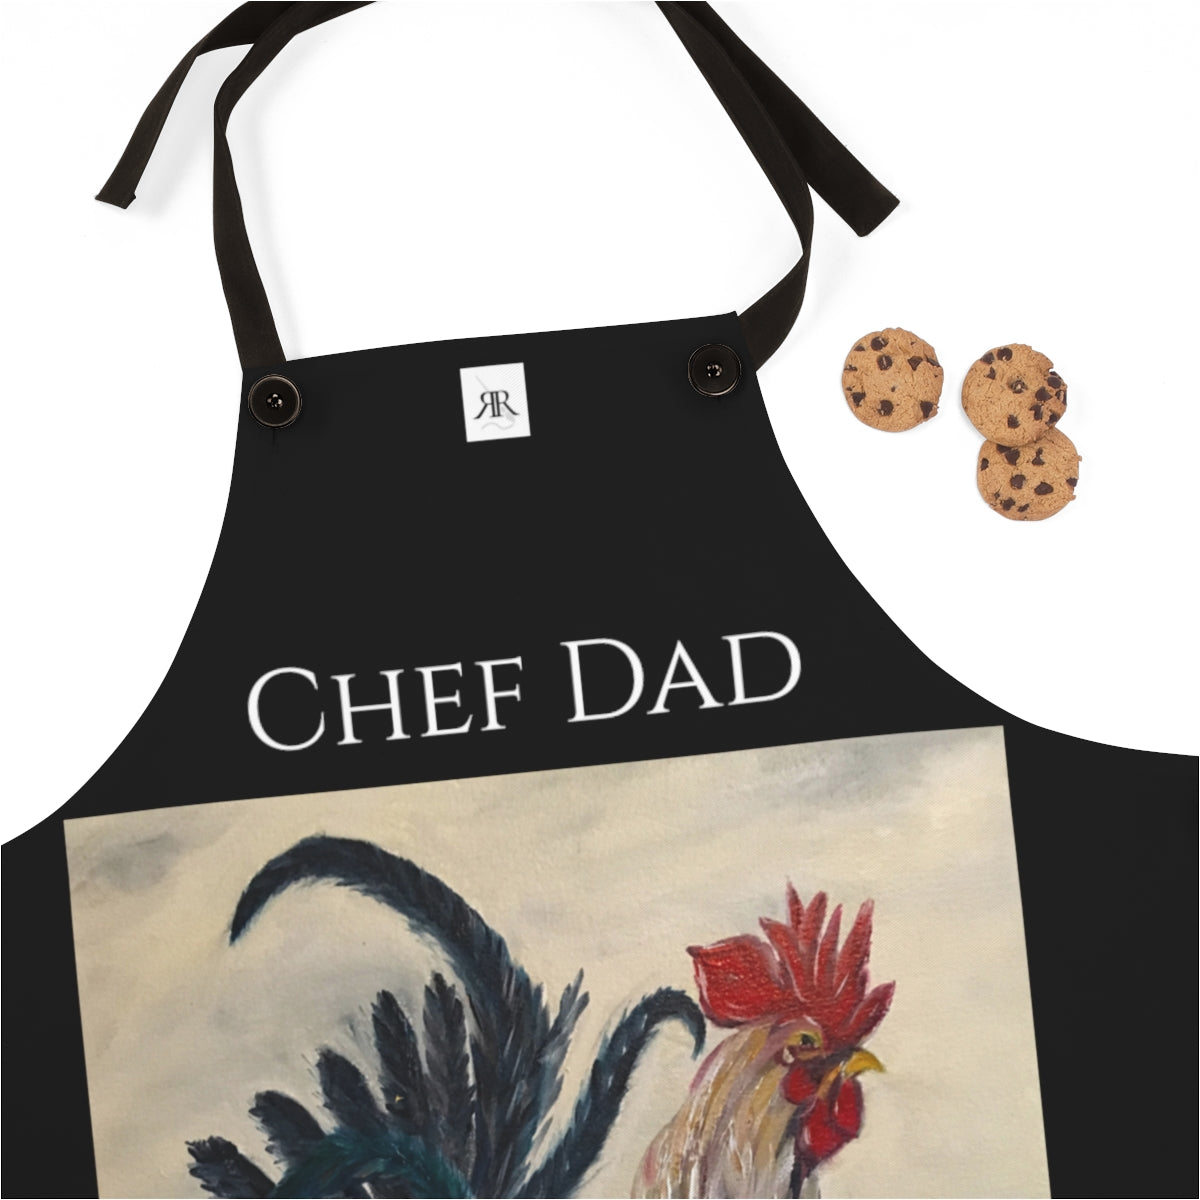 Chef Dad Original Rooster Painting  Printed on Black Apron